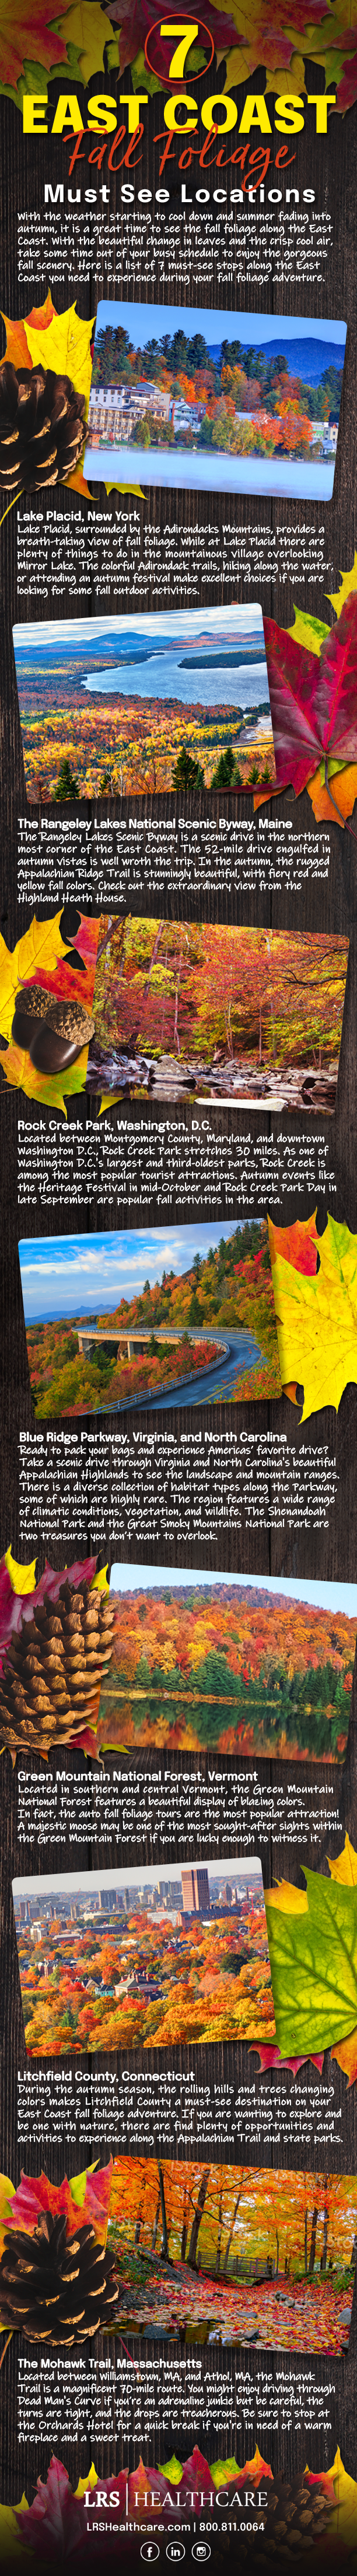 East coast locations that are a must see for fall foliage